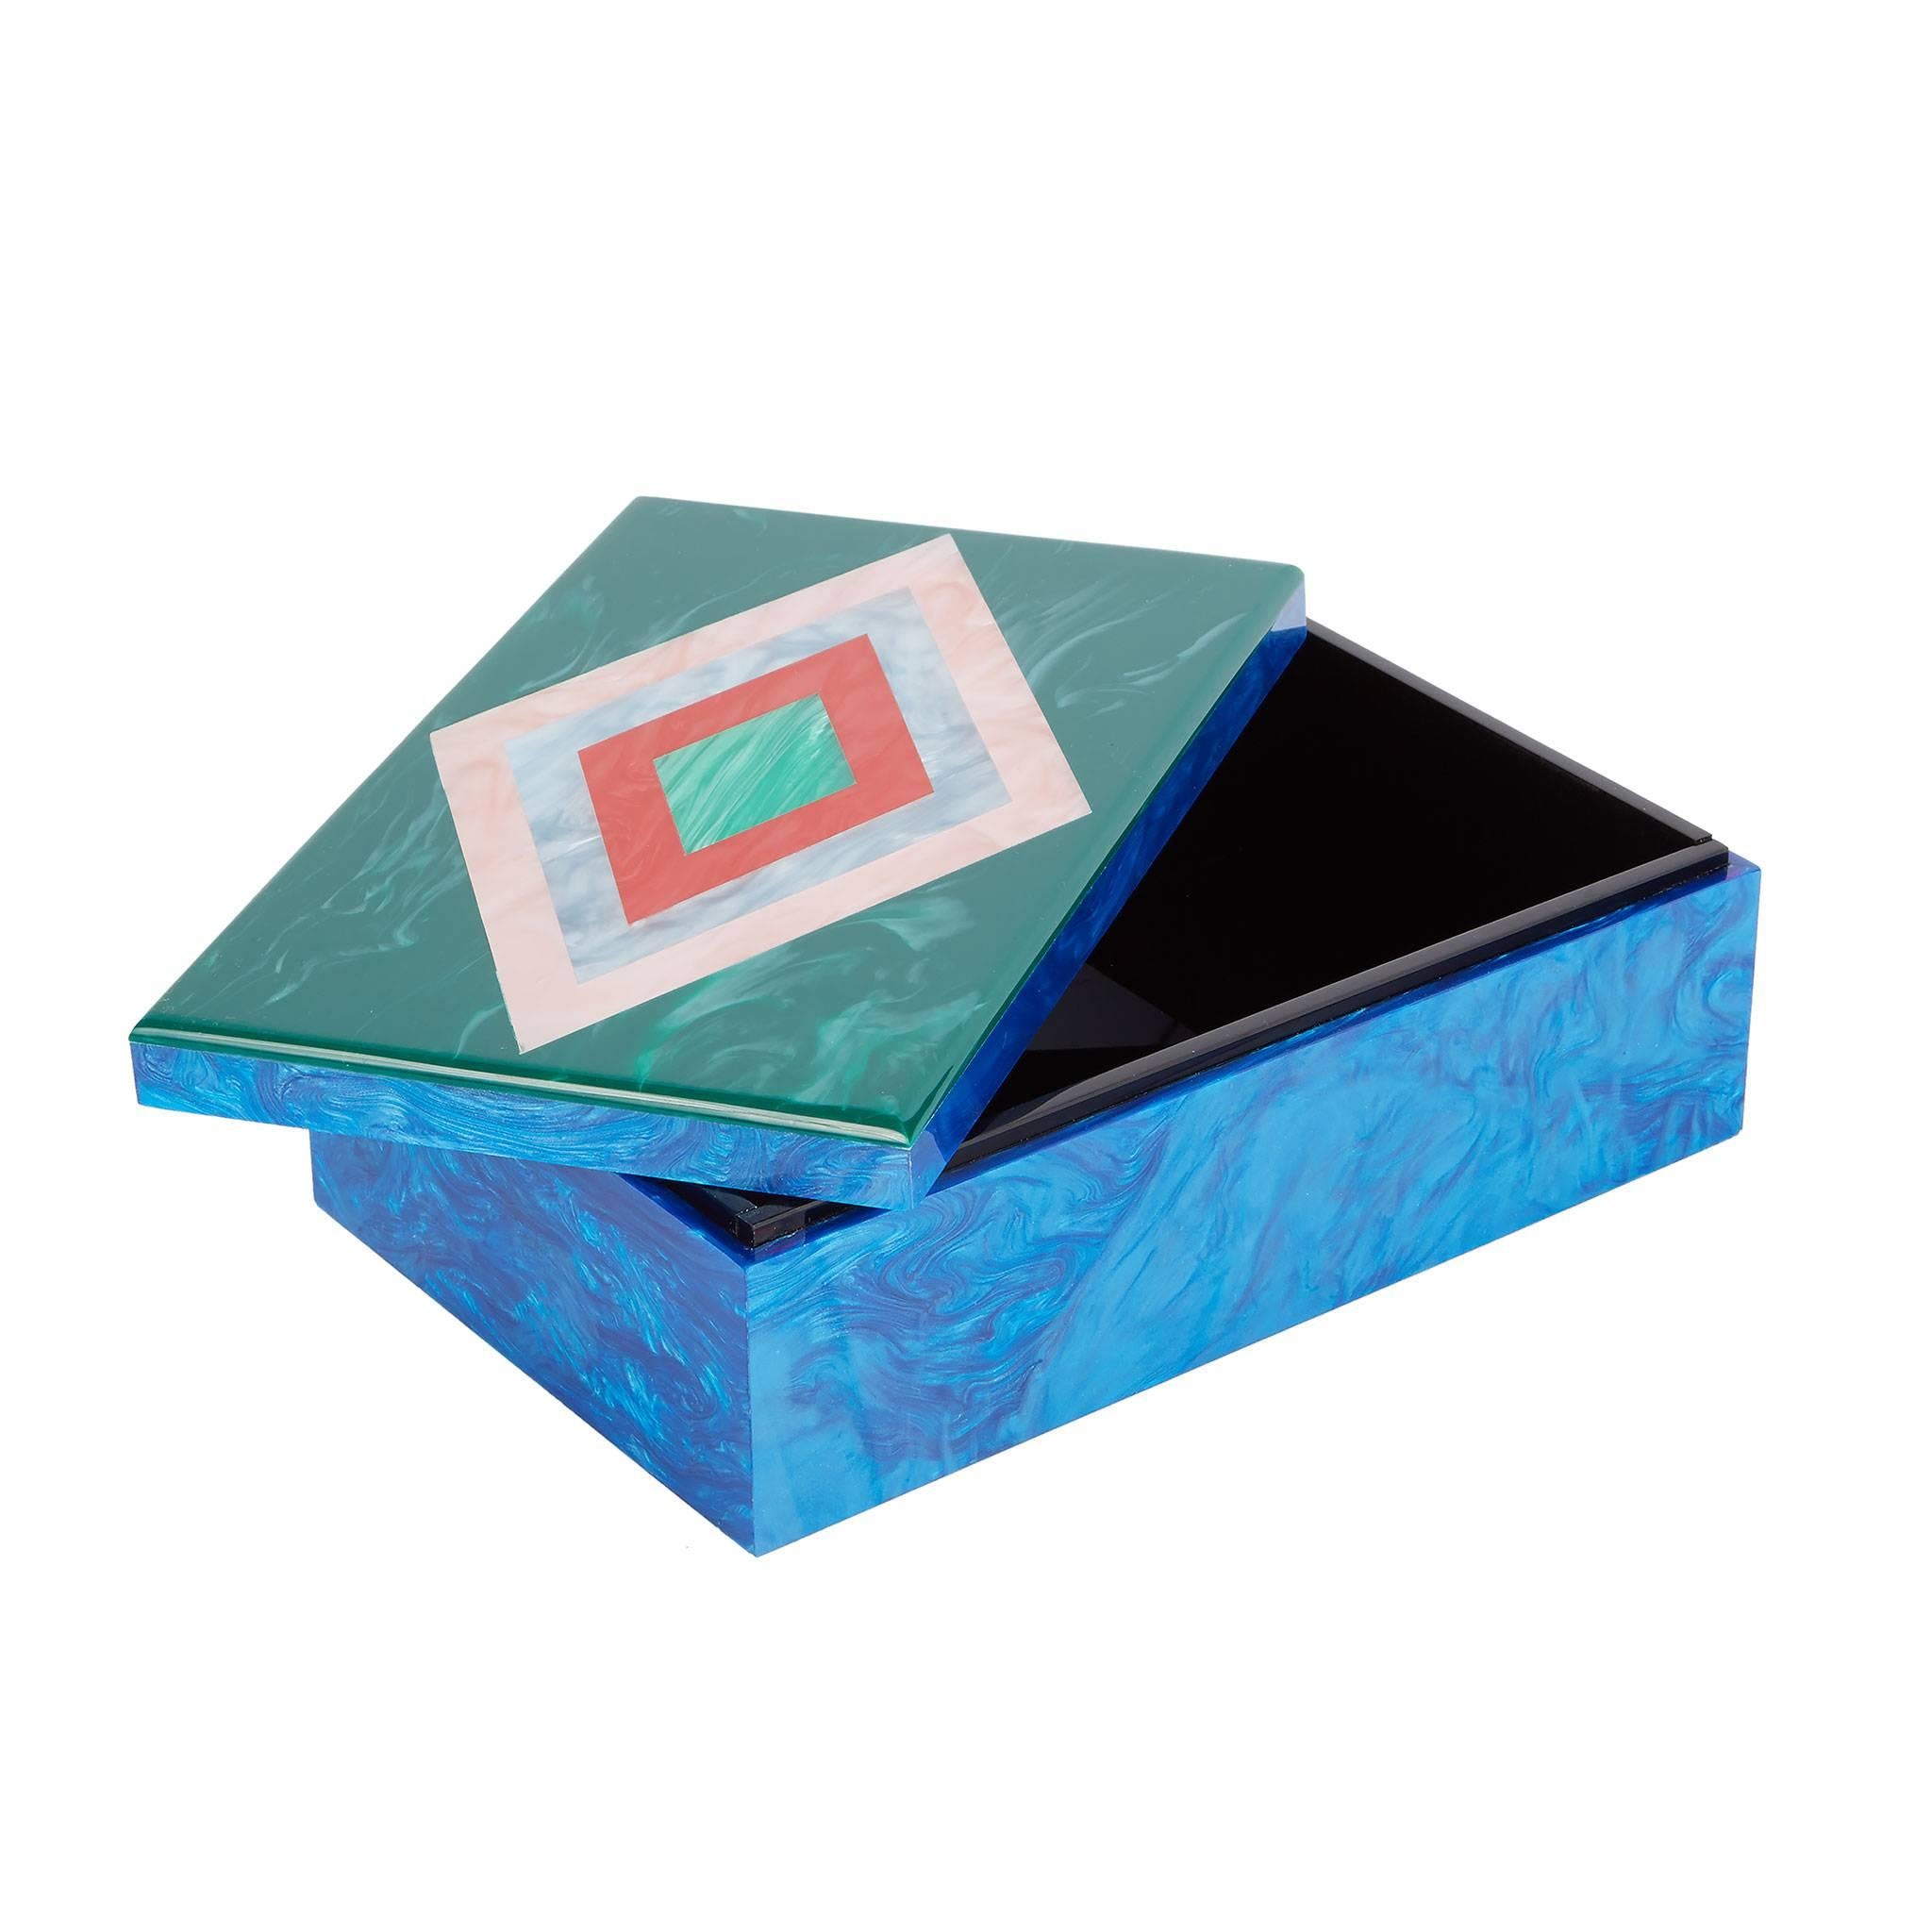 Diamond box with ocean pearlescent base and malachite lid with diamond motif in pink, blue, red pearlescent and kelly green. 

100% hand poured acrylic
Etched logo at base

Edie Parker products are handcrafted of the finest materials by skilled